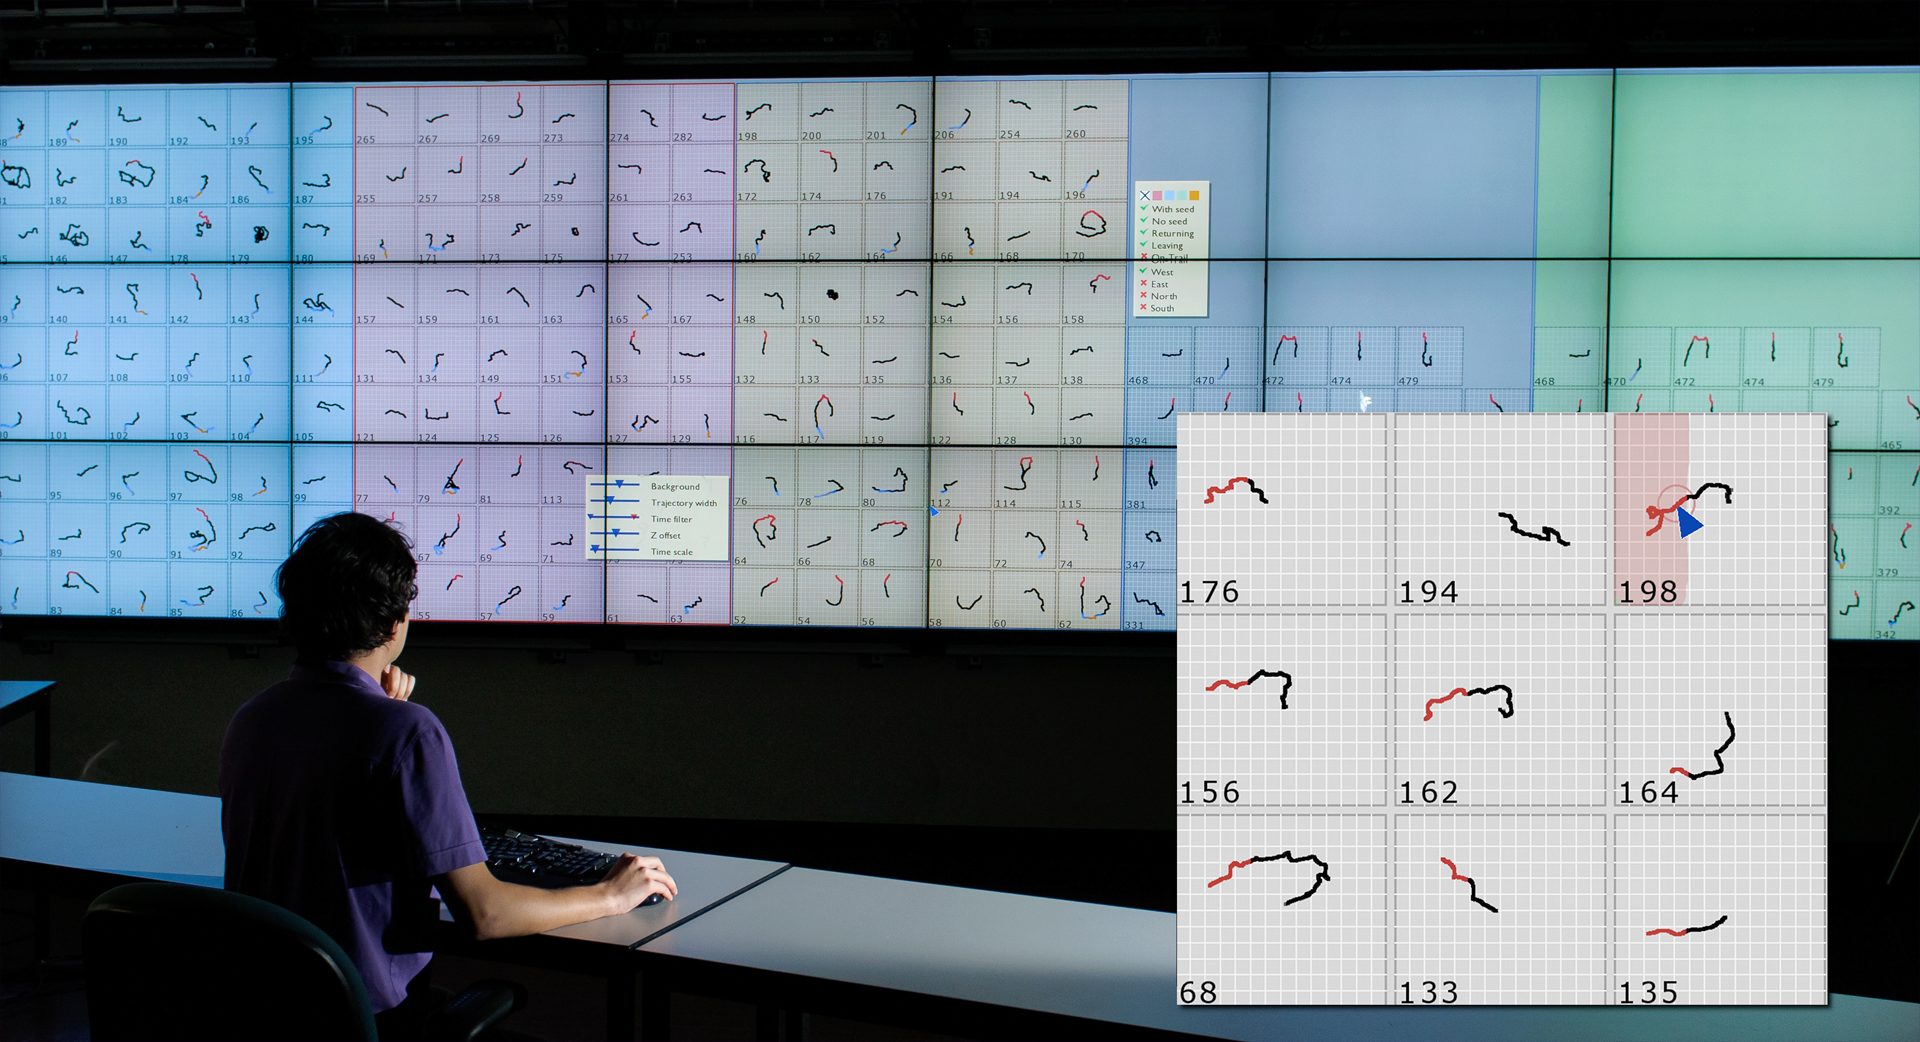 The visualization environment employed in the pilot user study